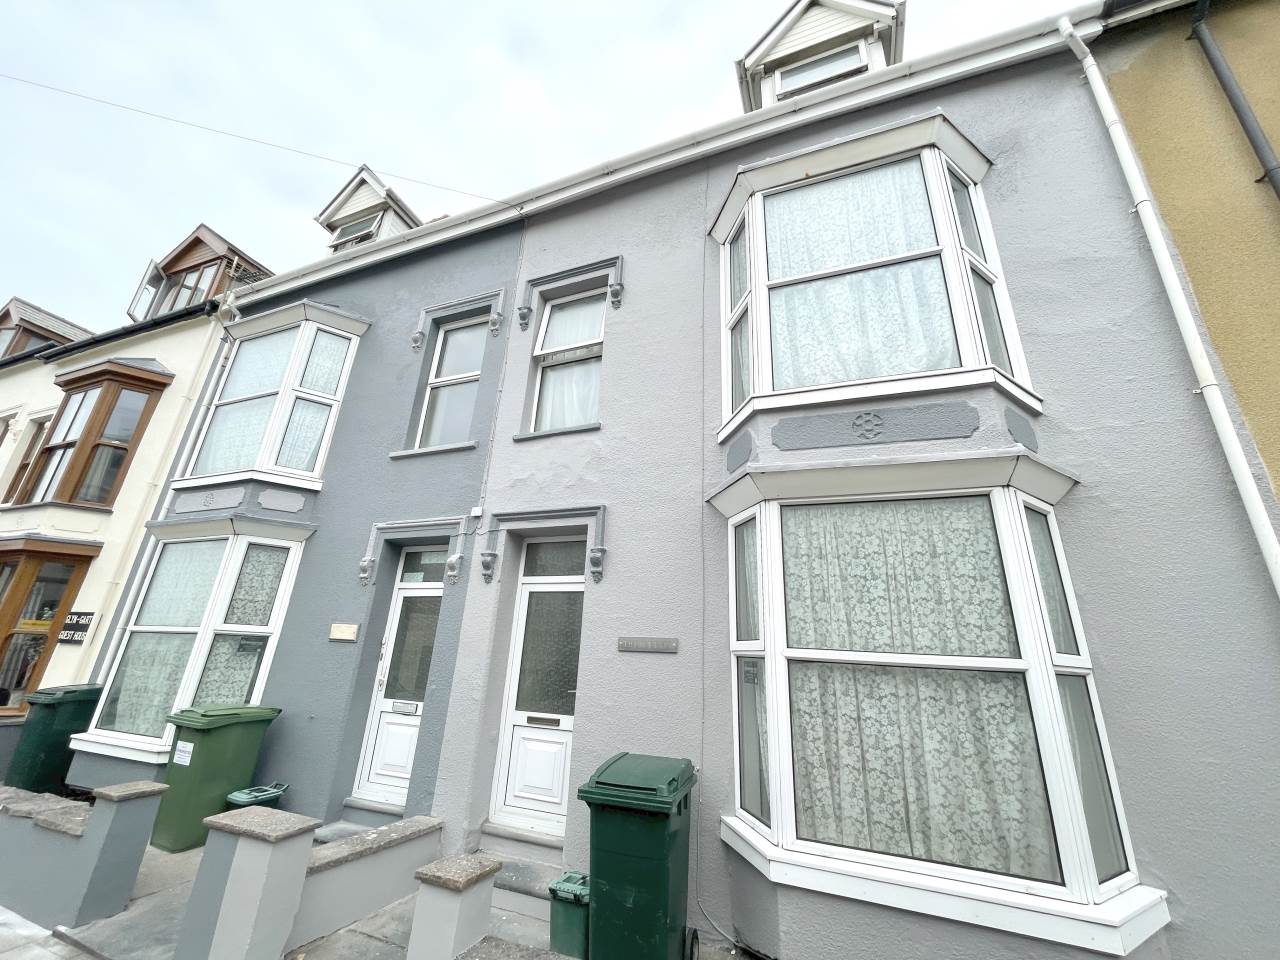 7 bed house to rent in Trem Y Don South Road, Aberystwyth, SY23